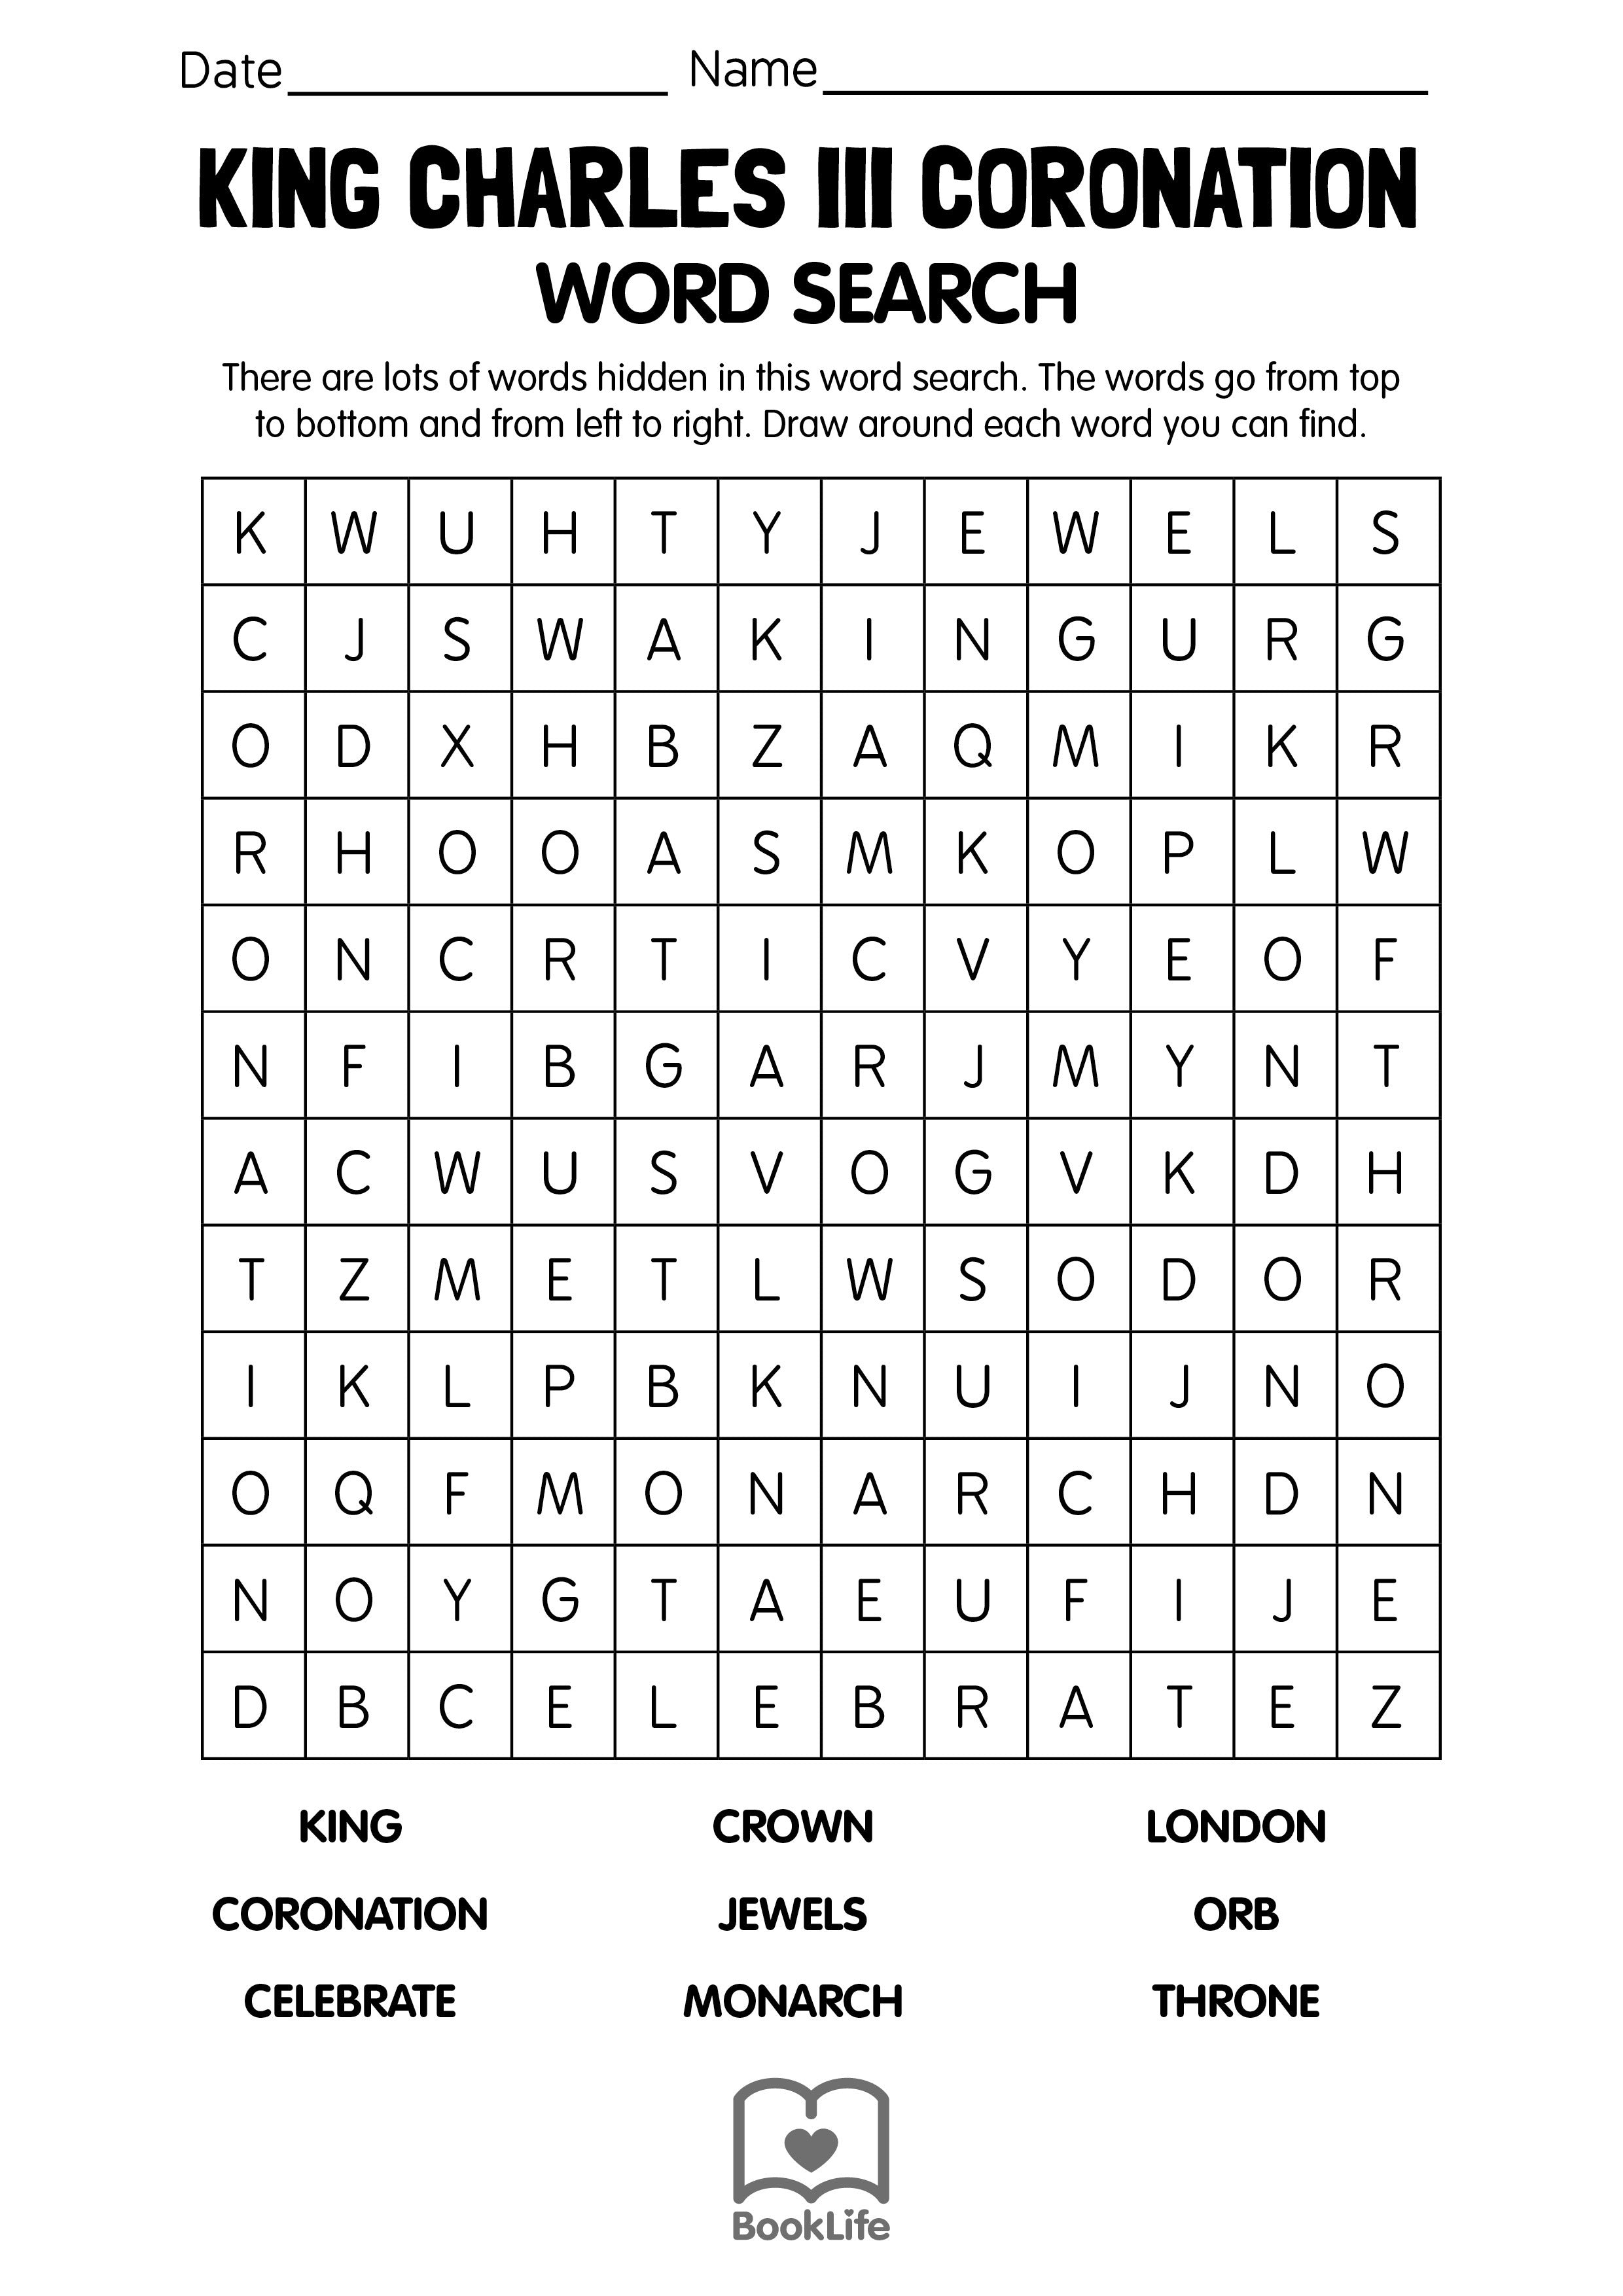 King Charles lll Coronation Word Search